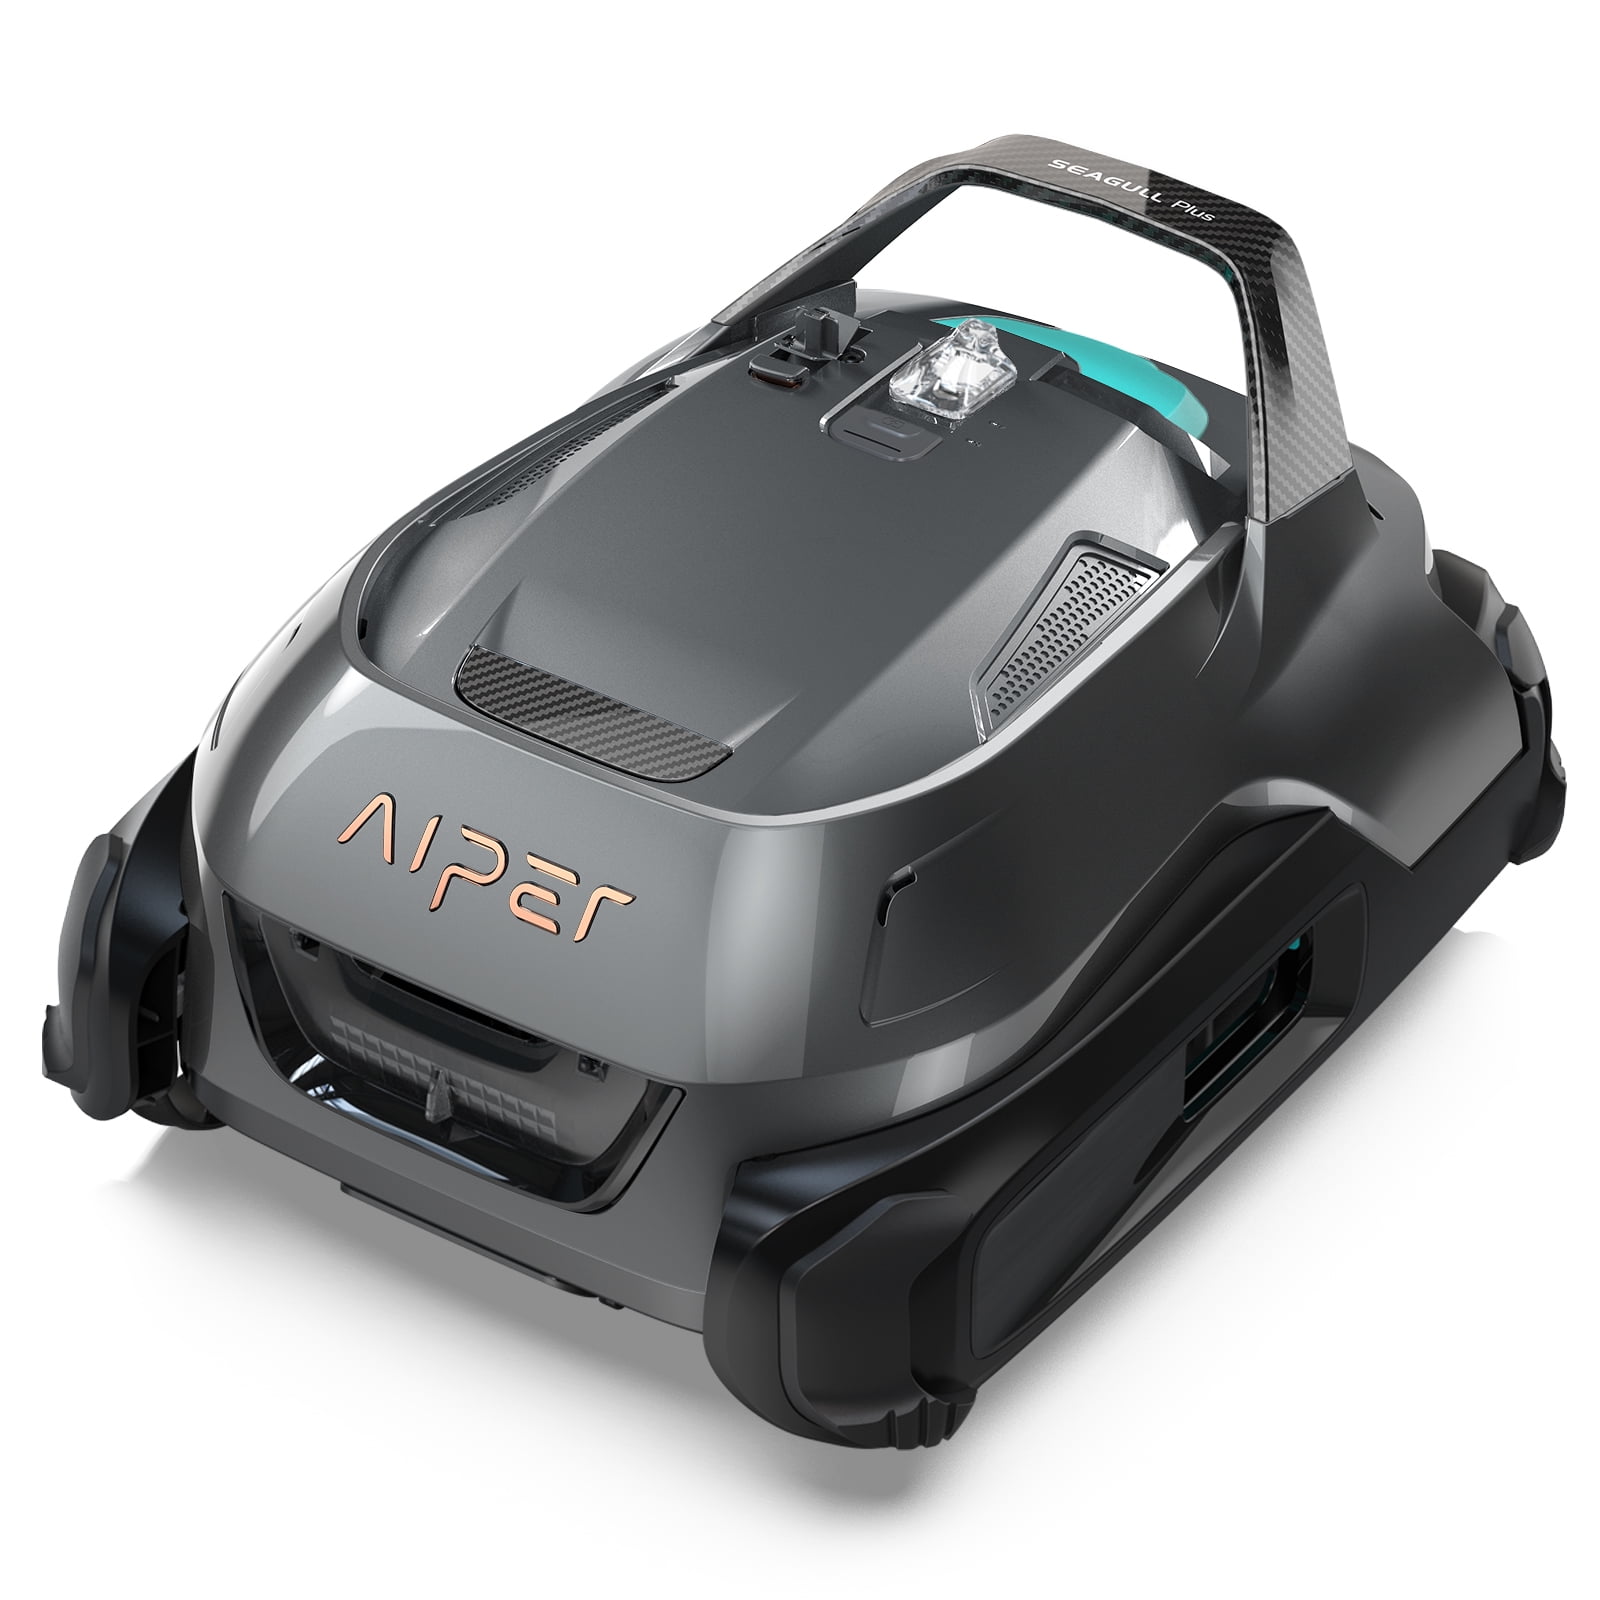  Lydsto Cordless Robotic Pool Cleaner, Automatic Pool Vacuum,  Dual-Motor, Stronger Power Suction, Self-Parking, Ideal for Inground or  Above Ground Pools Green : Patio, Lawn & Garden